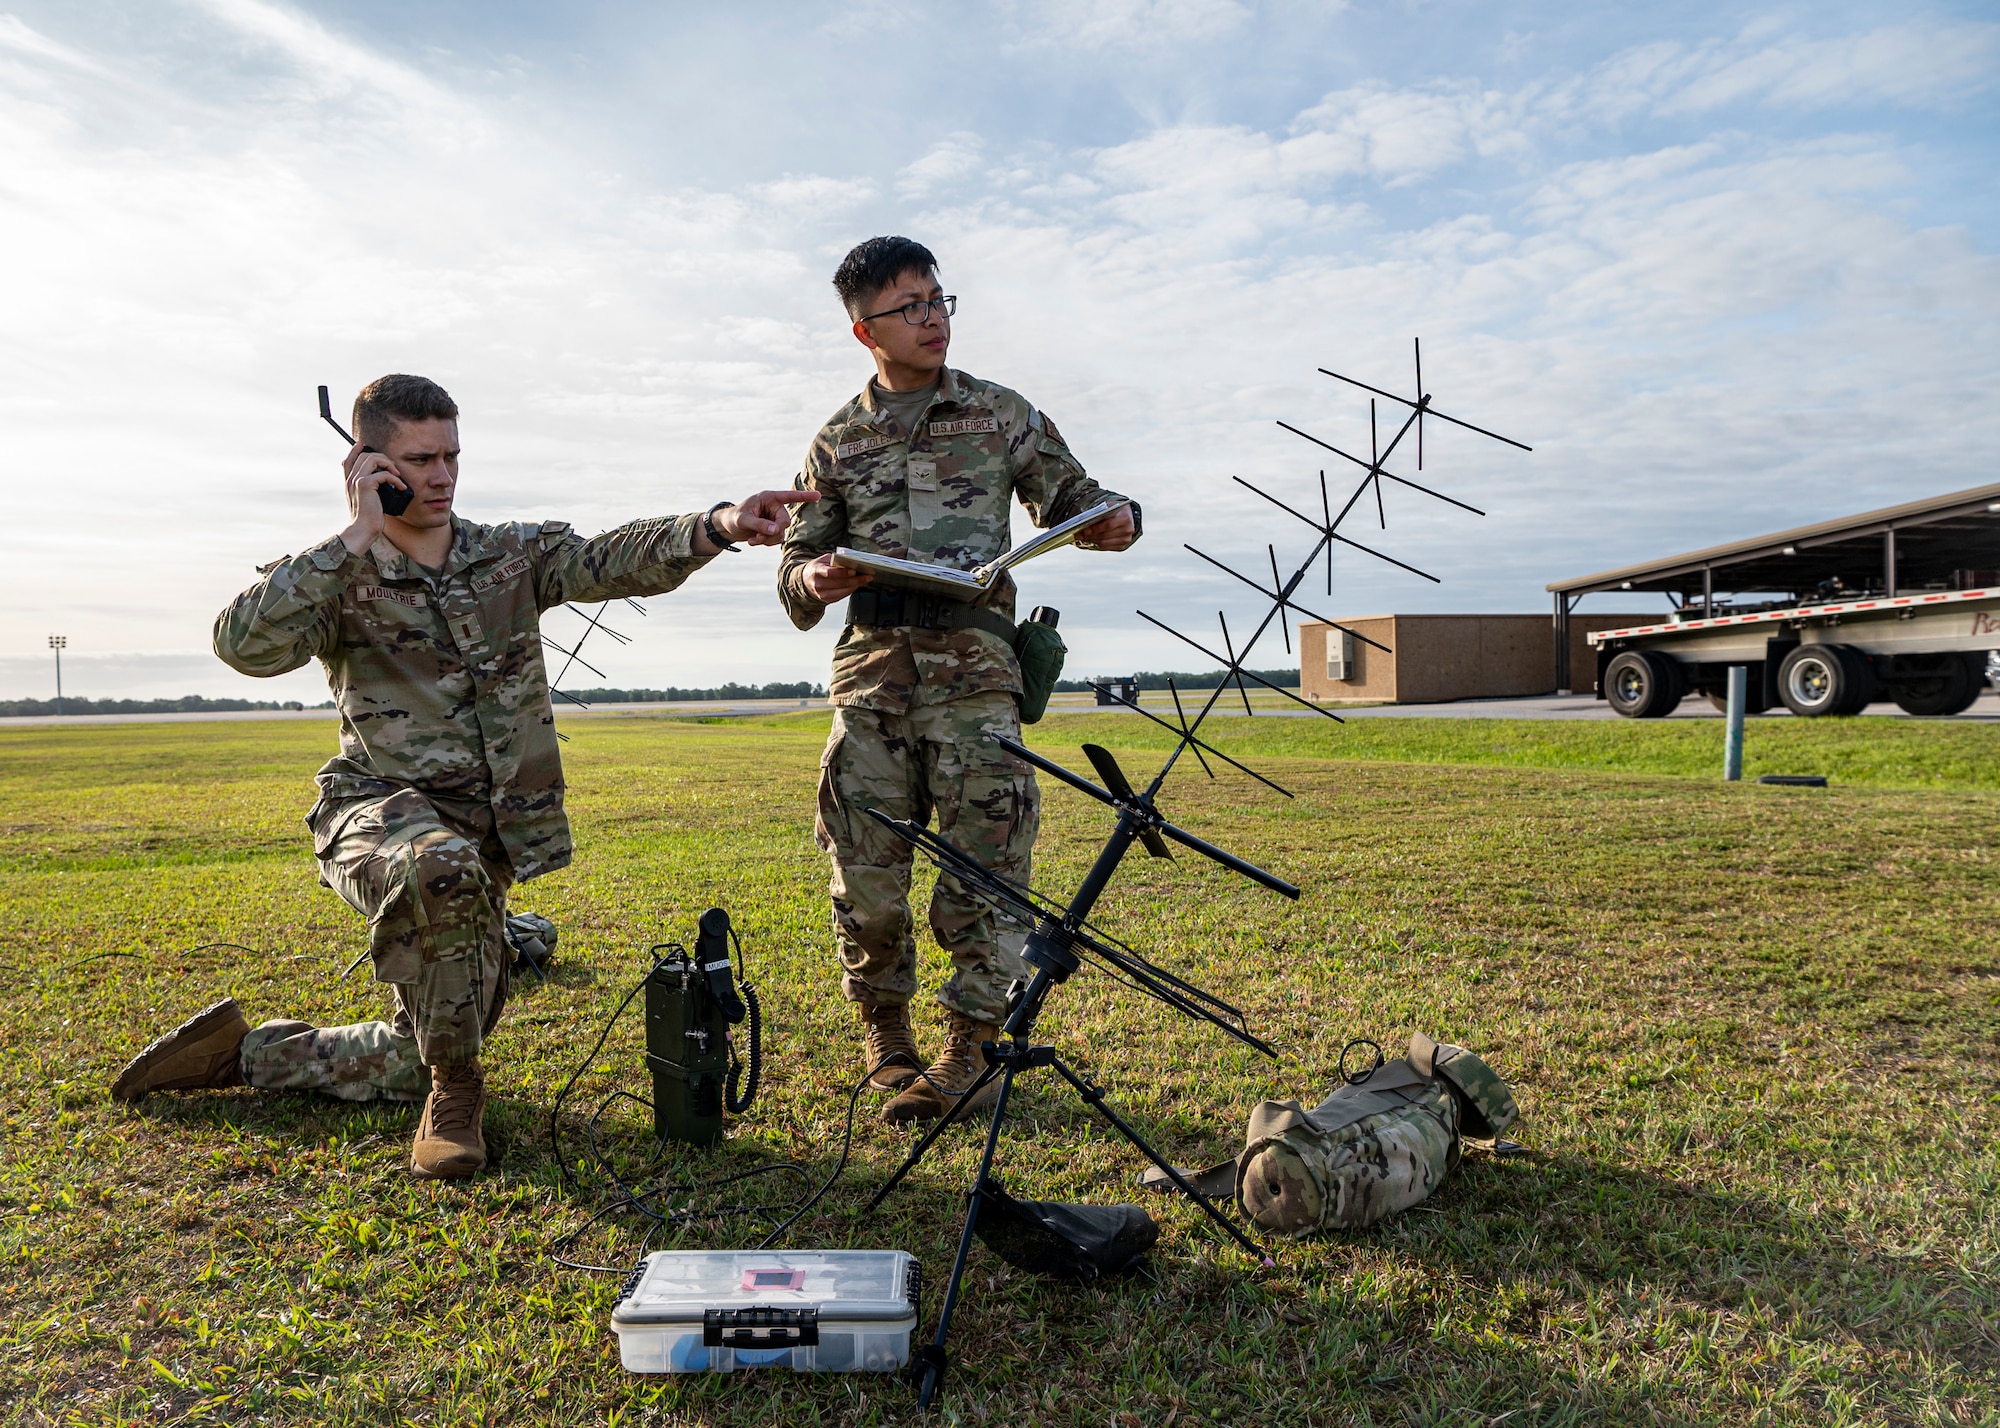 U.S. Air Force 2nd Lt. Jake Moultrie, 23rd Communications Squadron radio officer in charge, and Airman Randy Frejoles, 23rd CS radio frequency operator, test equipment at Avon Park Air Force Range, Florida, April 9, 2024. Rapid setup of communications capabilities is essential at austere locations when exercising the Agile Combat Employment concept.  Ready Tiger 24-1 is a readiness exercise demonstrating the 23rd Wing’s ability to plan, prepare and execute operations and maintenance to project air power in contested and dispersed locations, defending the United States’ interests and allies. (U.S. Air Force photo by Airman 1st Class Leonid Soubbotine)